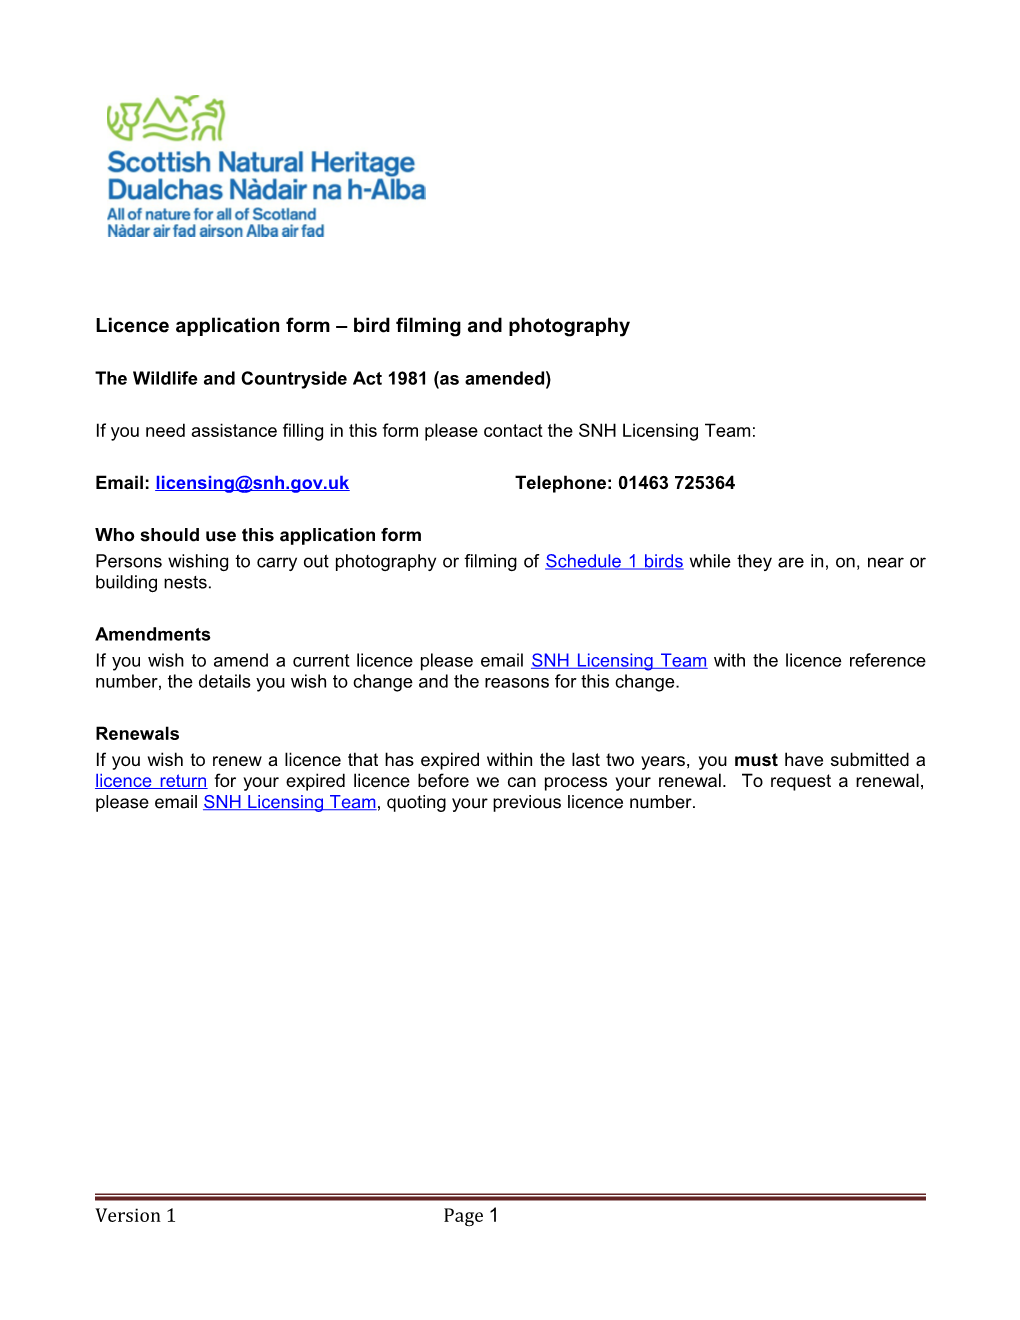 Licence Application Form Bird Filming and Photography